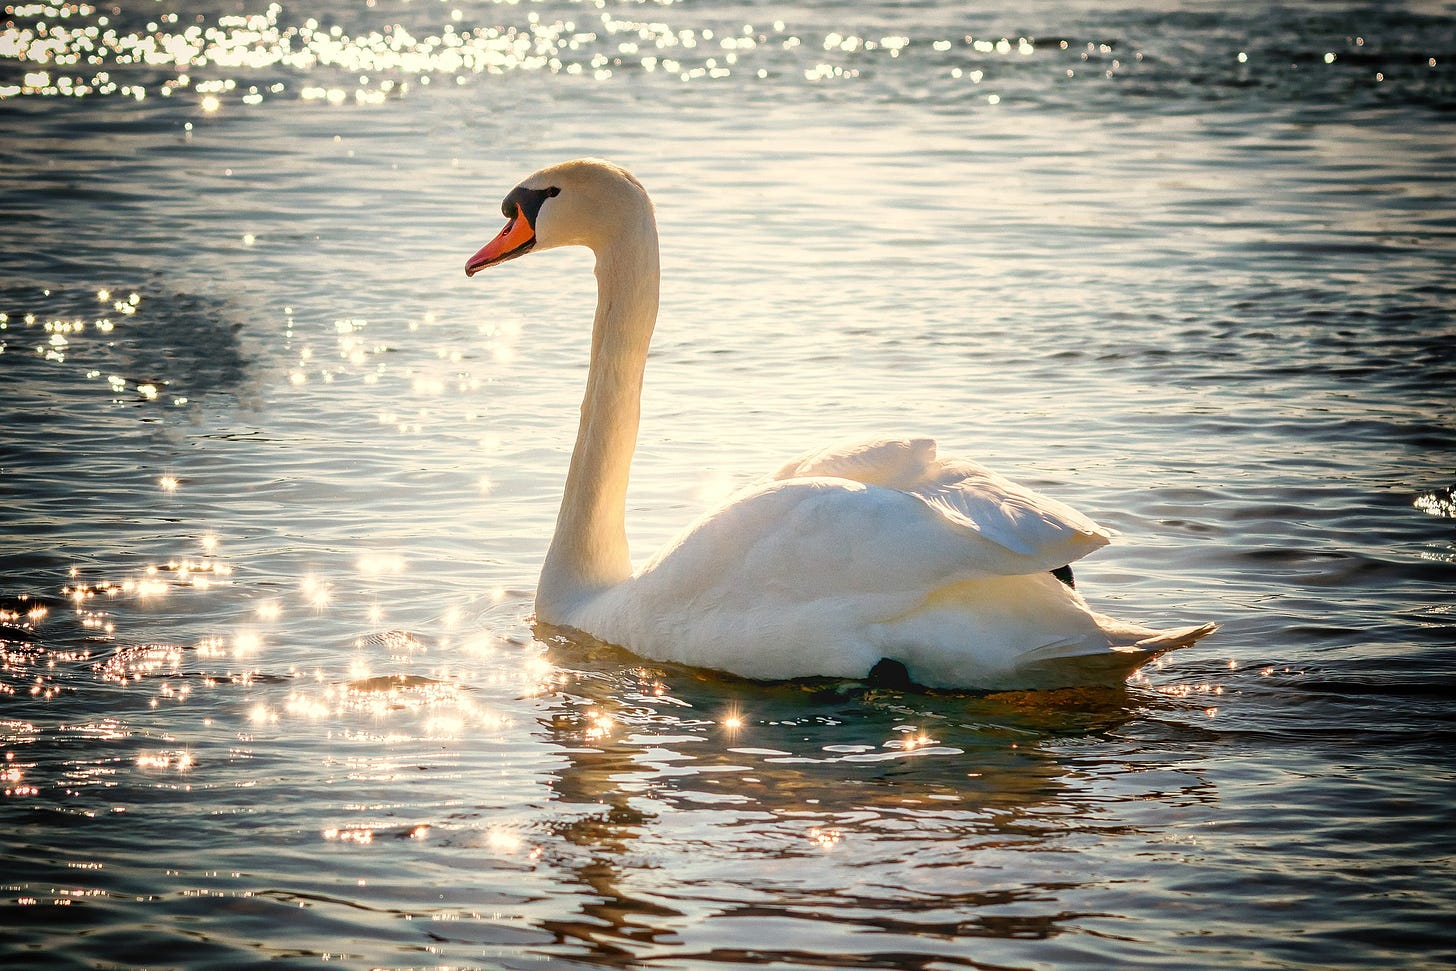 A white swan with orange beak and black facemask floats in classic pose in a large pond or lake; sunlight sparkles off the gentle ripples in the water.